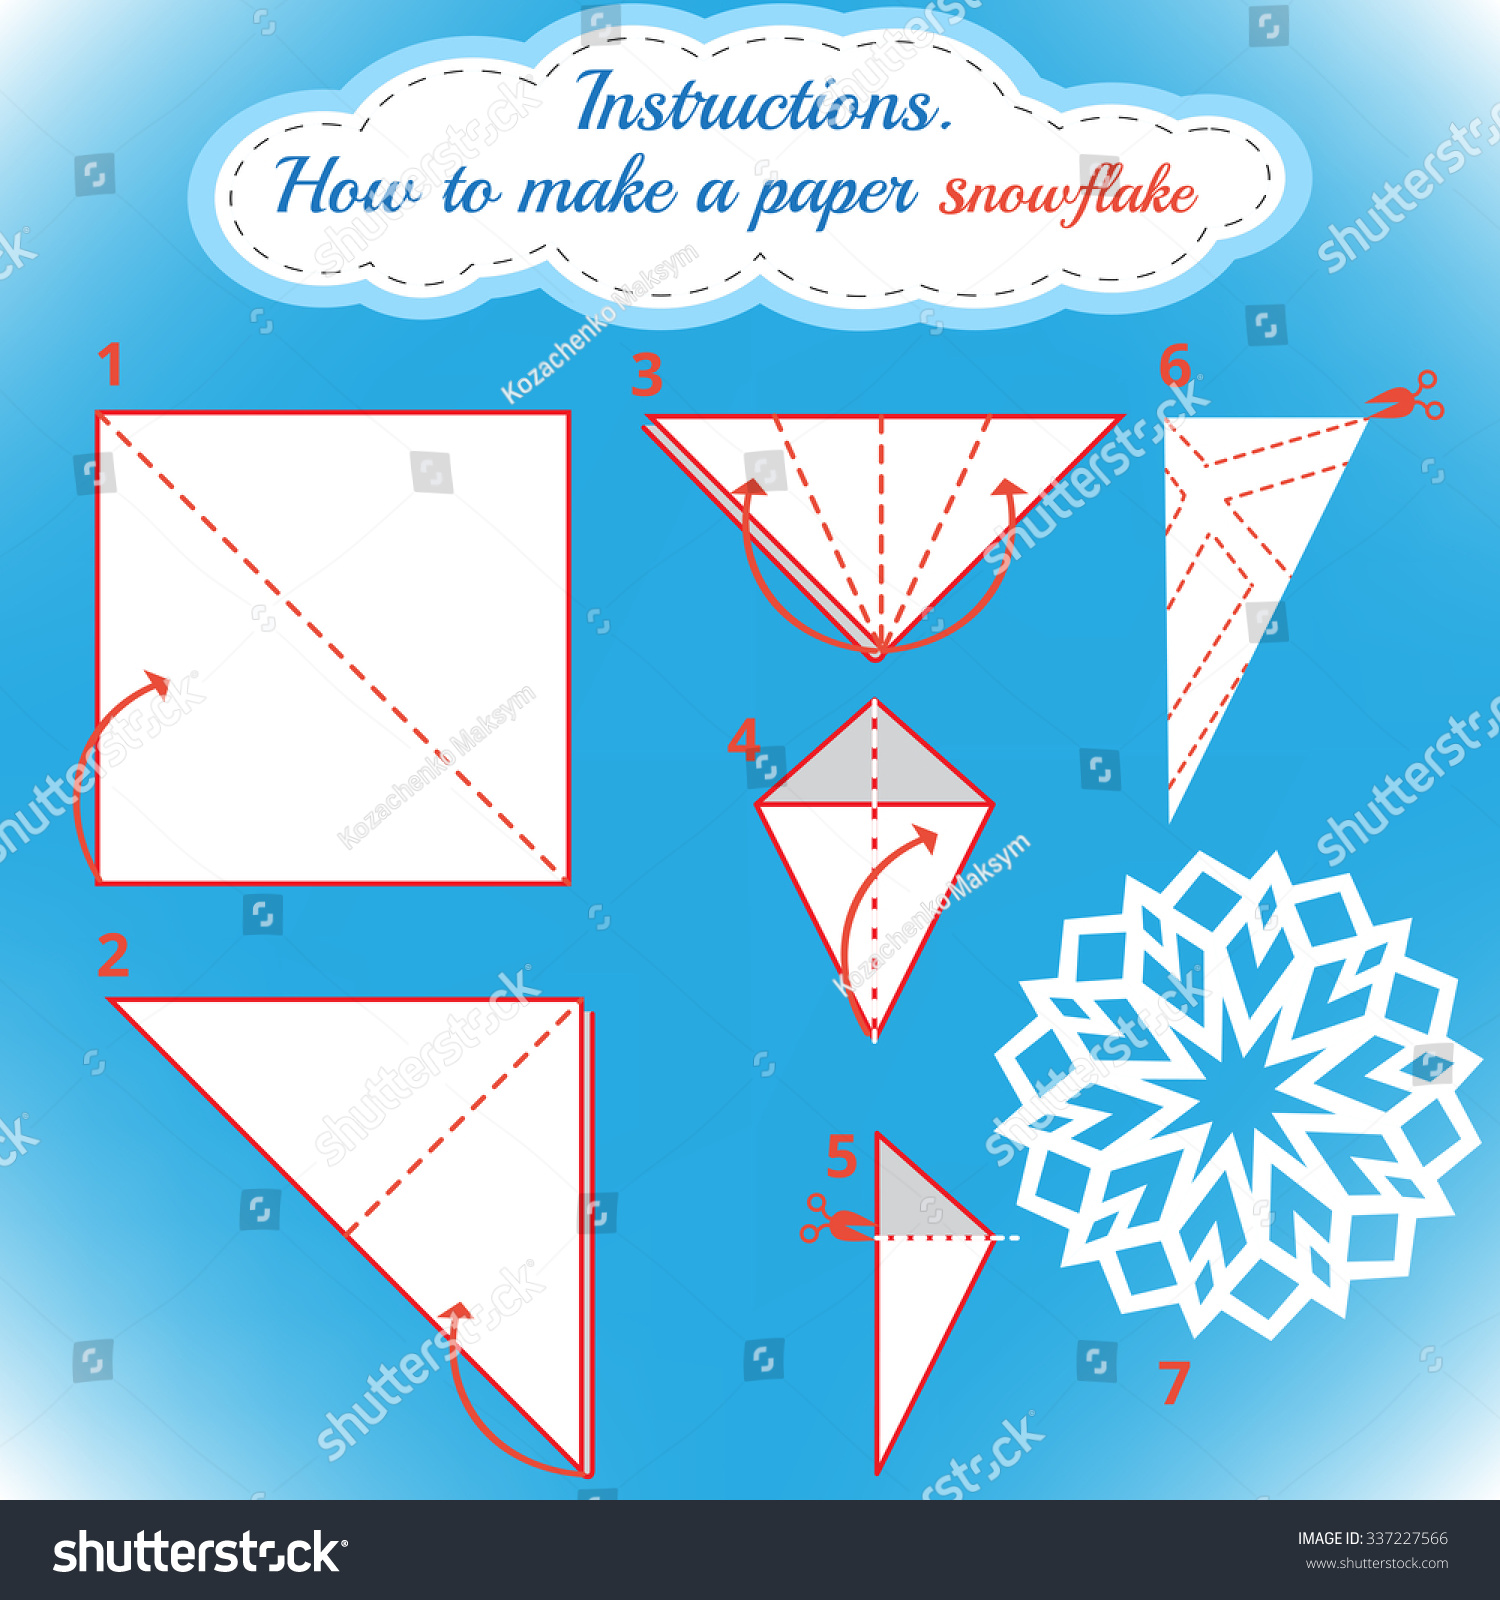 instructions-how-to-make-paper-snowflake-tutorial-christmas-snowflake